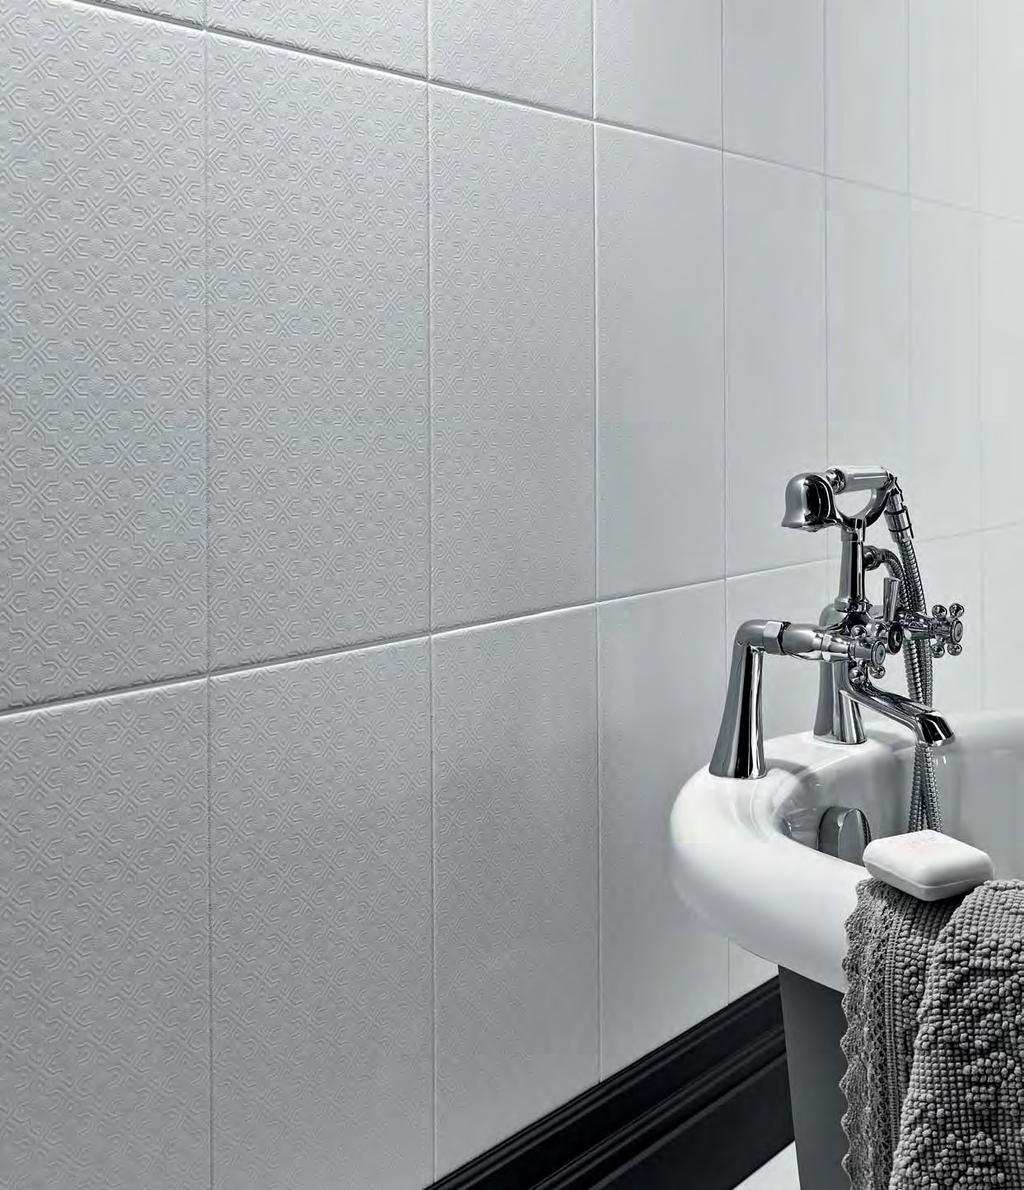 DEFINITIONS Definitions brings a subtle hint of vintage glamour to our tile collections with the faux print structure adding an extra dimension to the plain